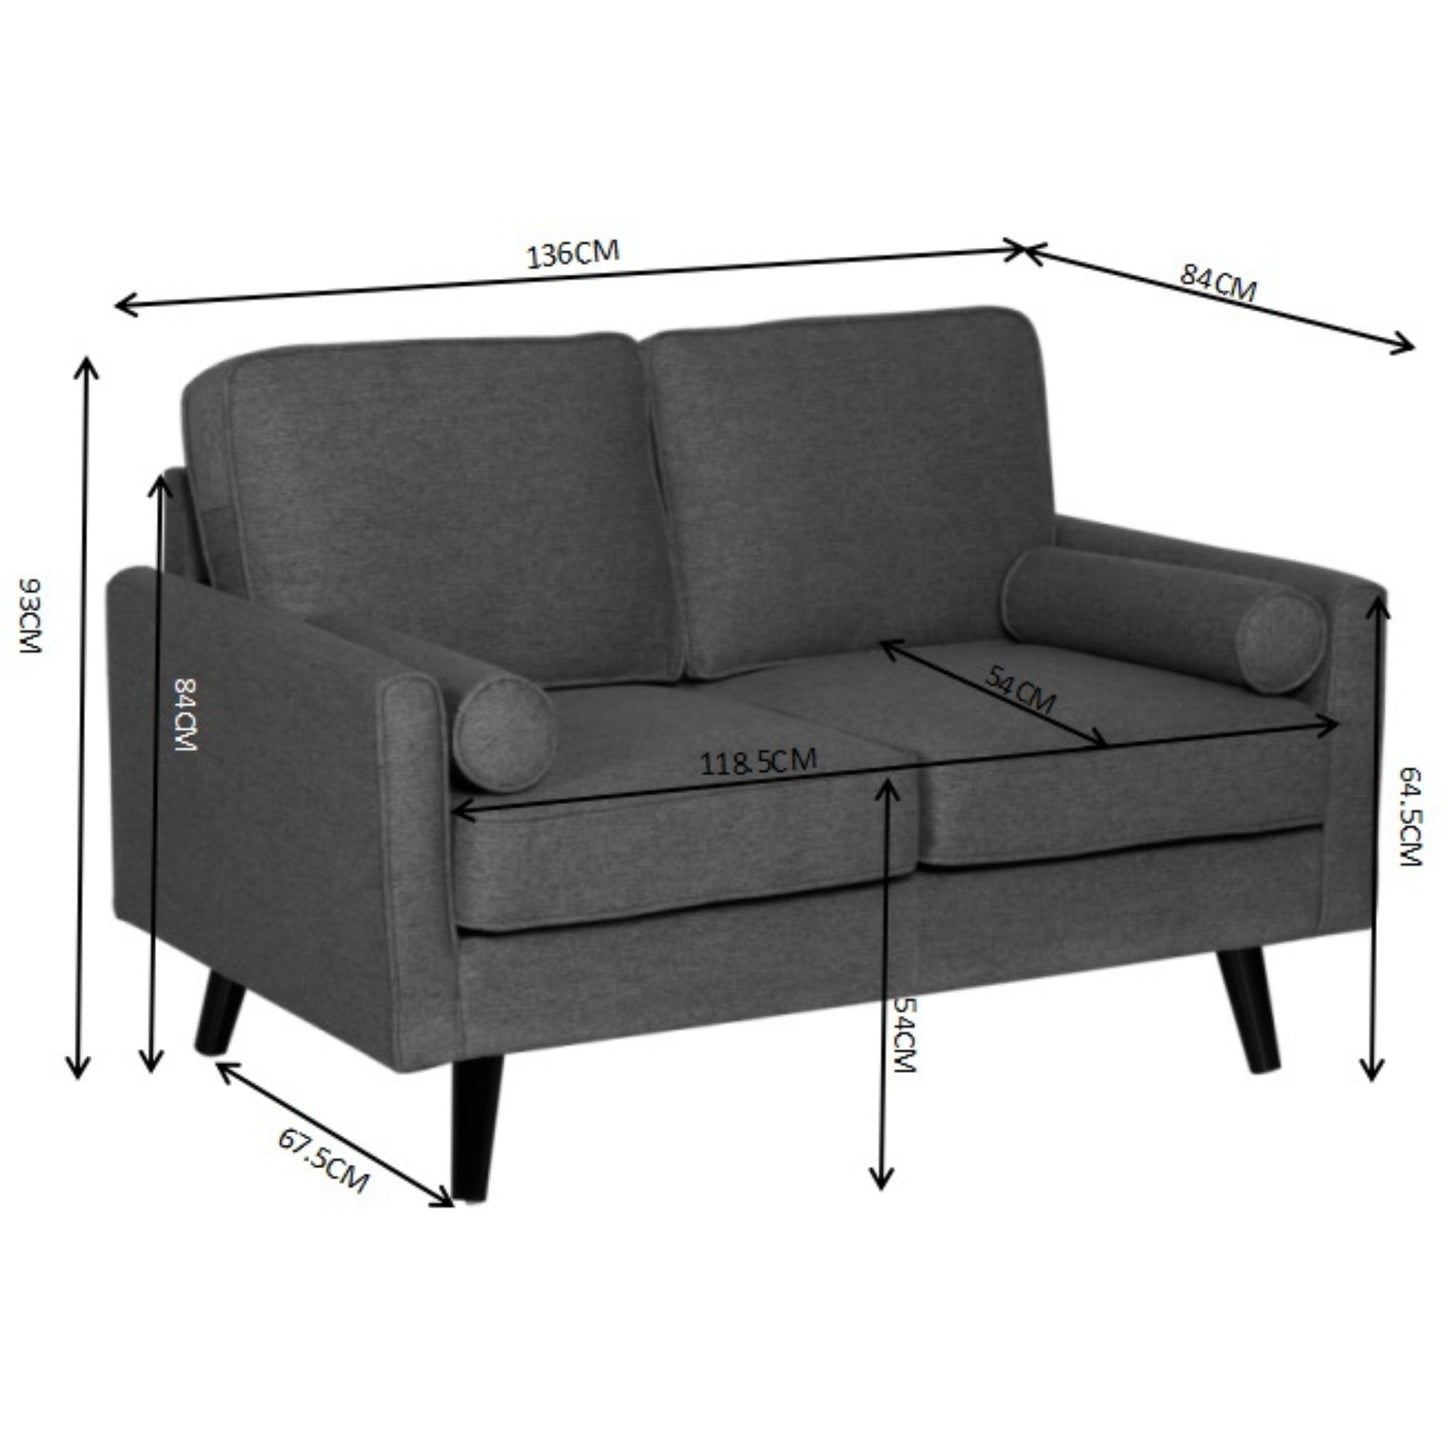 Lexi 2 + 2.5 Seater Sofa Set Fabric Uplholstered Lounge Couch - Dark Grey